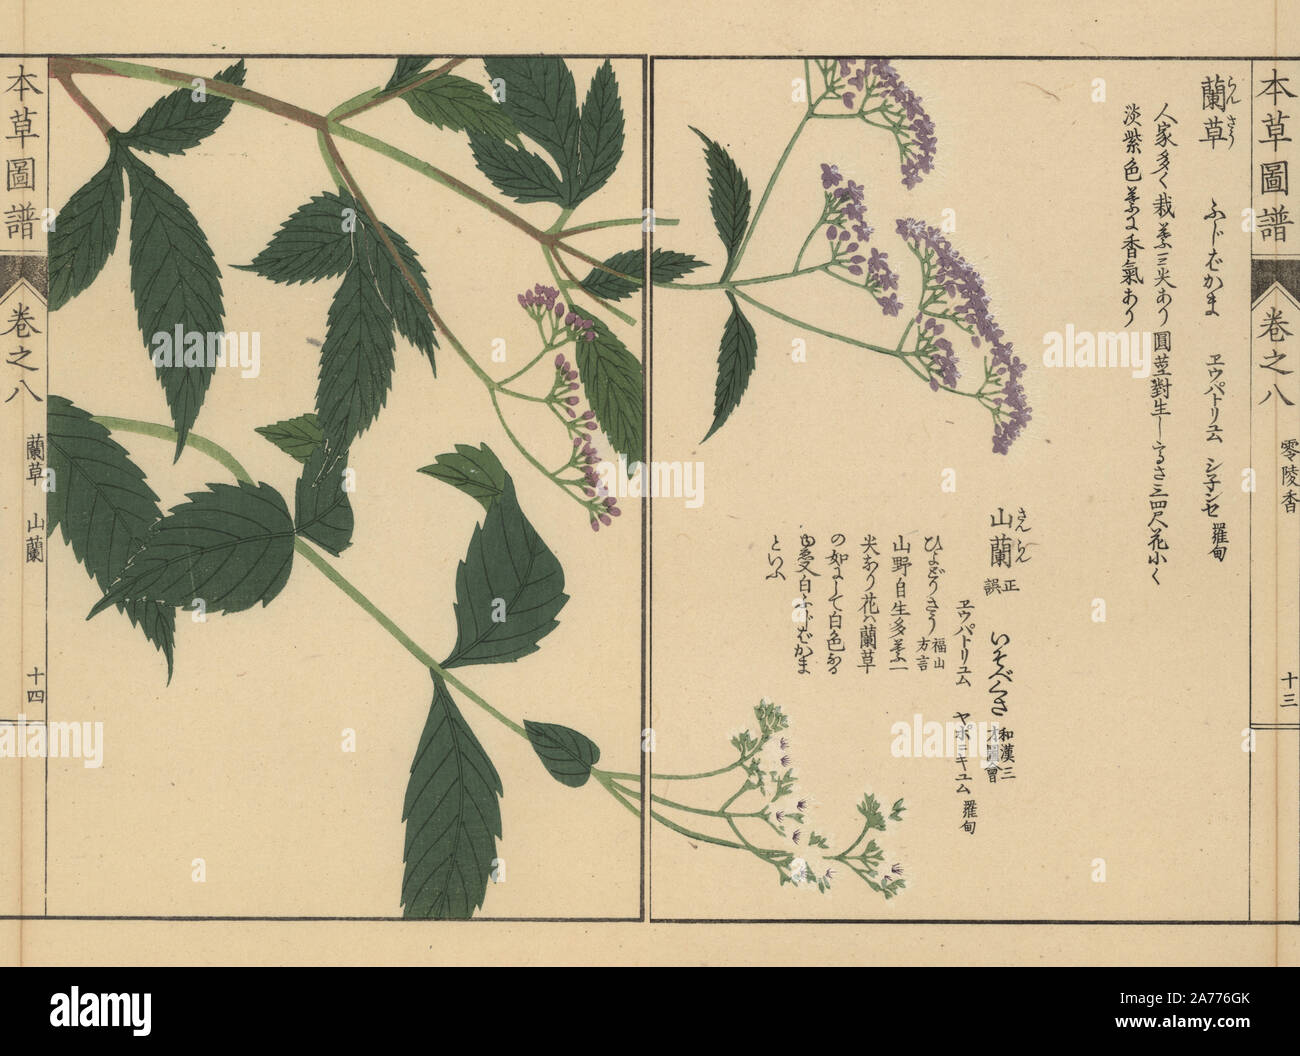 Chinese snakeroot, Eupatorium chinense, Japanese snakeroot, Eupatorium japonicum, and Sakhalin snakeroot, Eupatorium sachalinense Mak. Colour-printed woodblock engraving by Kan'en Iwasaki from 'Honzo Zufu,' an Illustrated Guide to Medicinal Plants, Japan, 1884. Iwasaki (1786-1842) was a Japanese botanist, entomologist and zoologist. He was one of the first Japanese botanists to incorporate western knowledge into his studies. Stock Photo